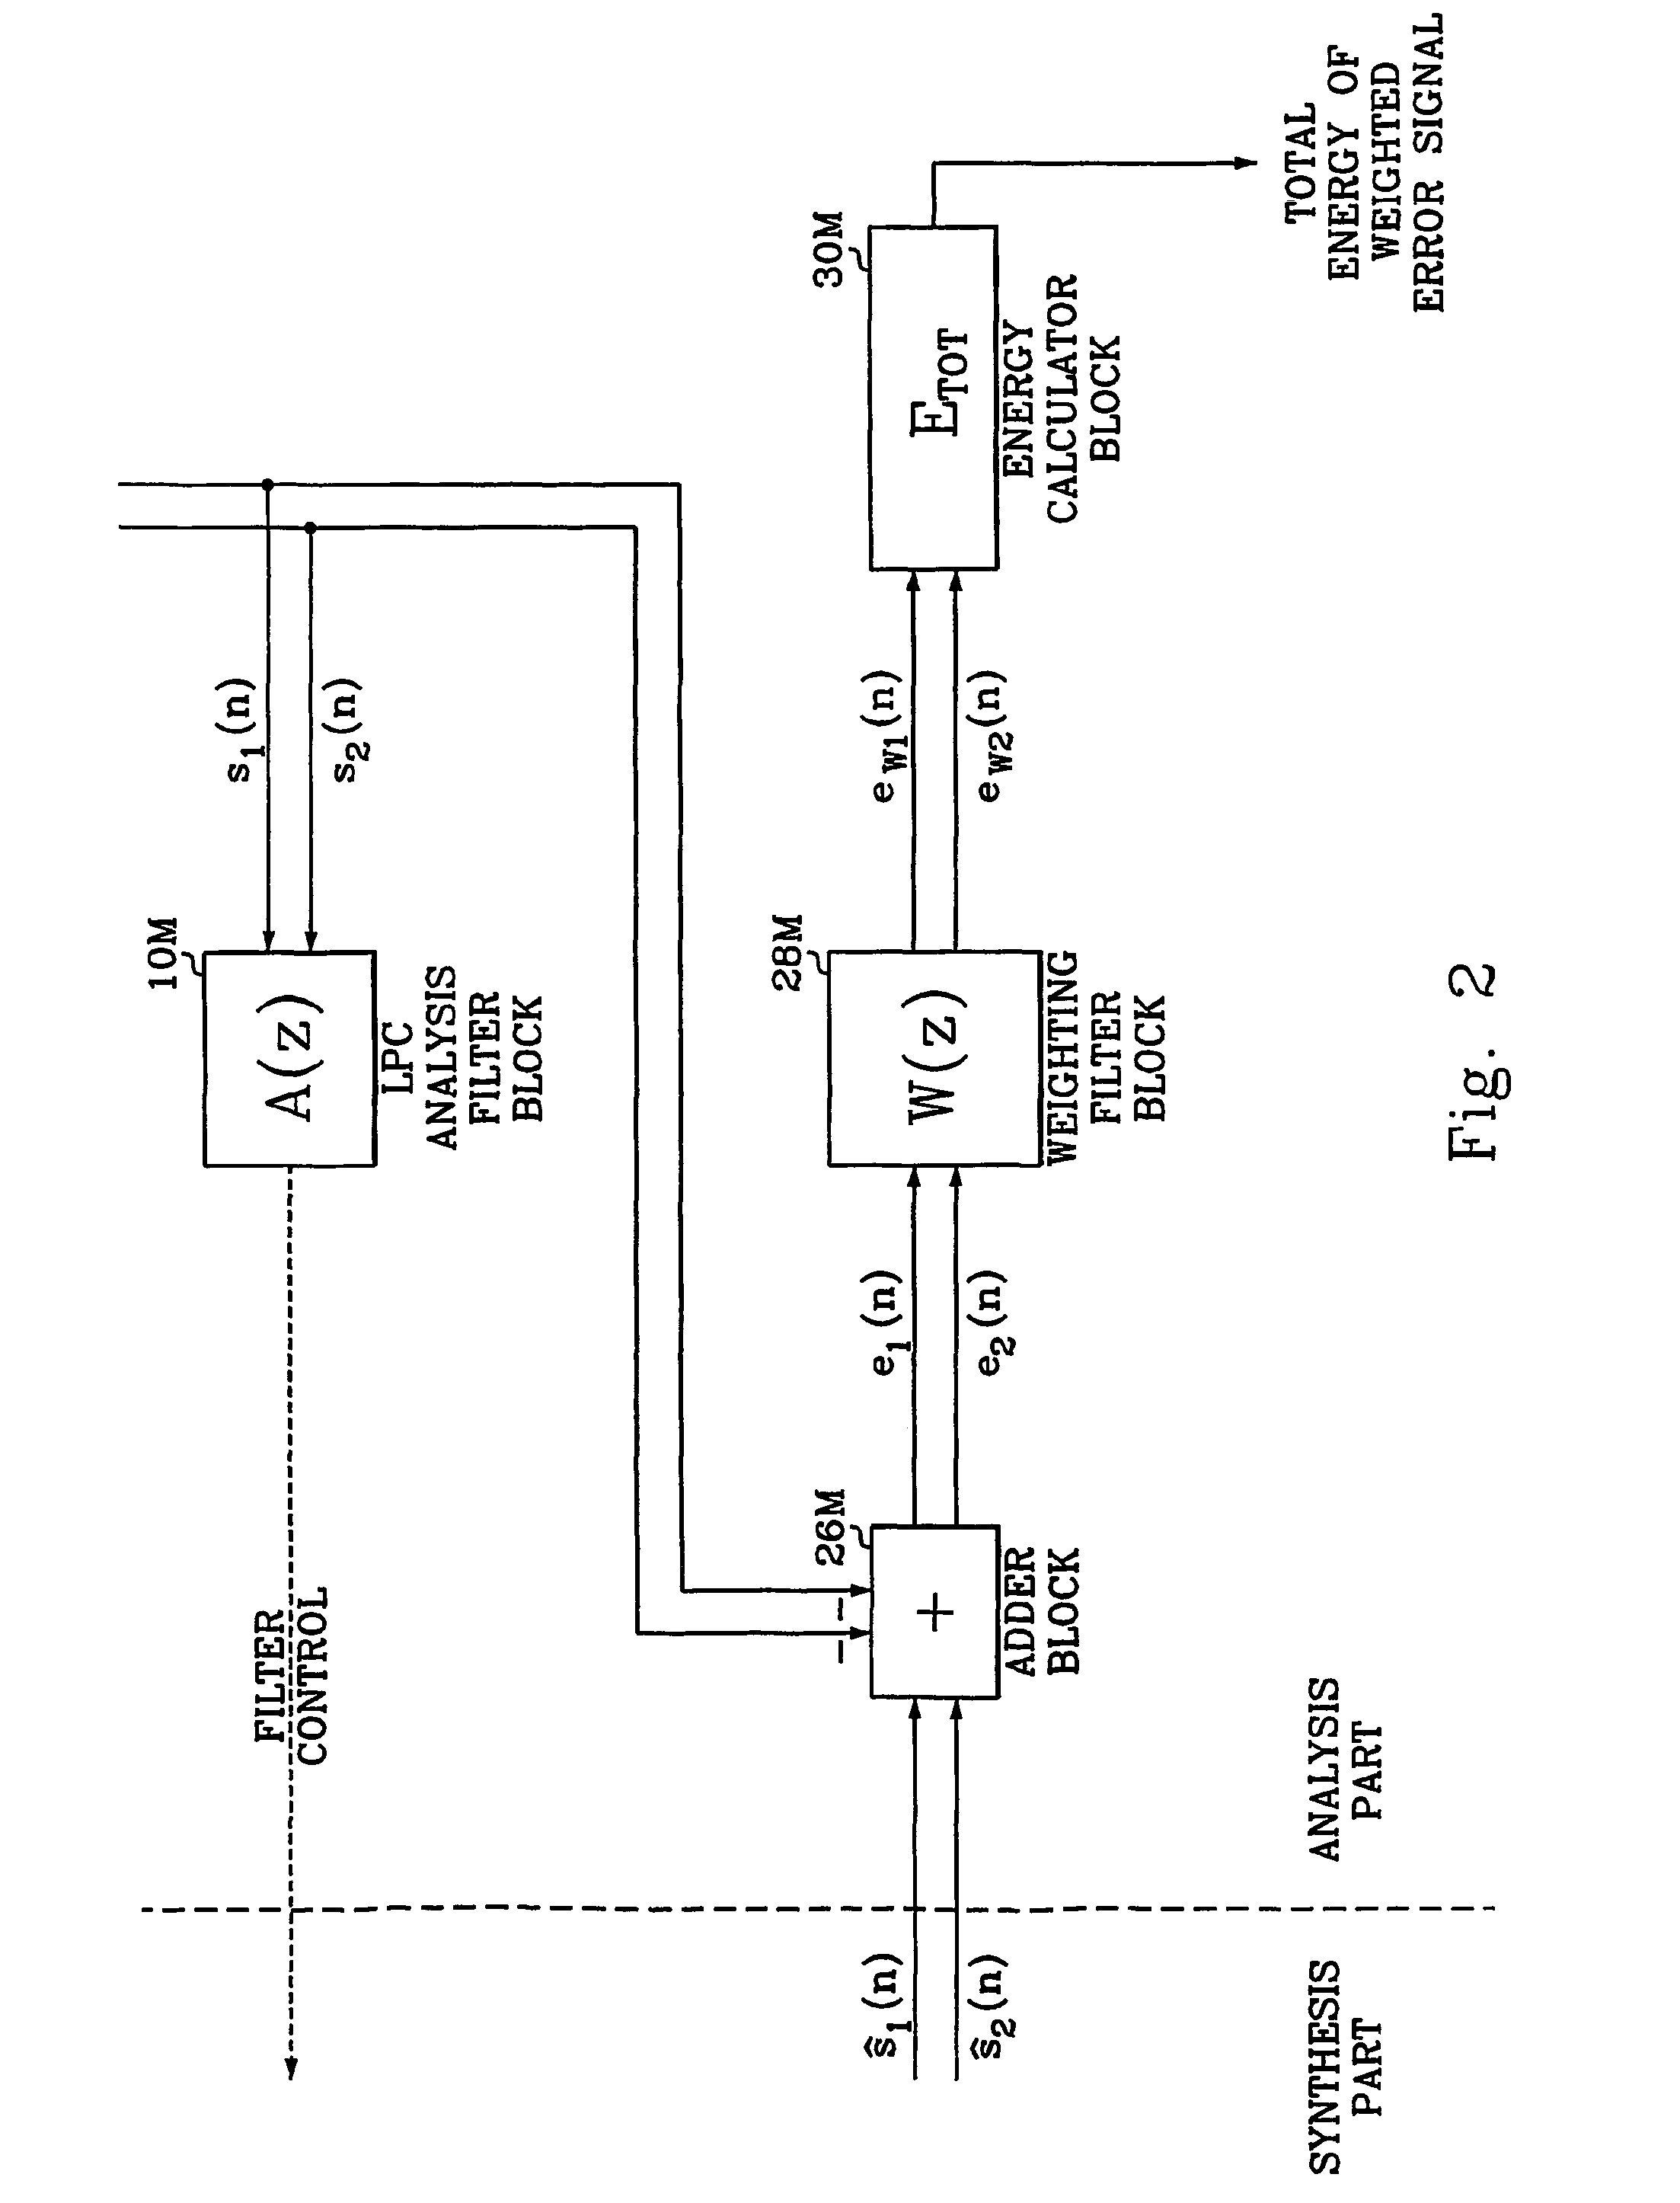 Multi-channel signal encoding and decoding